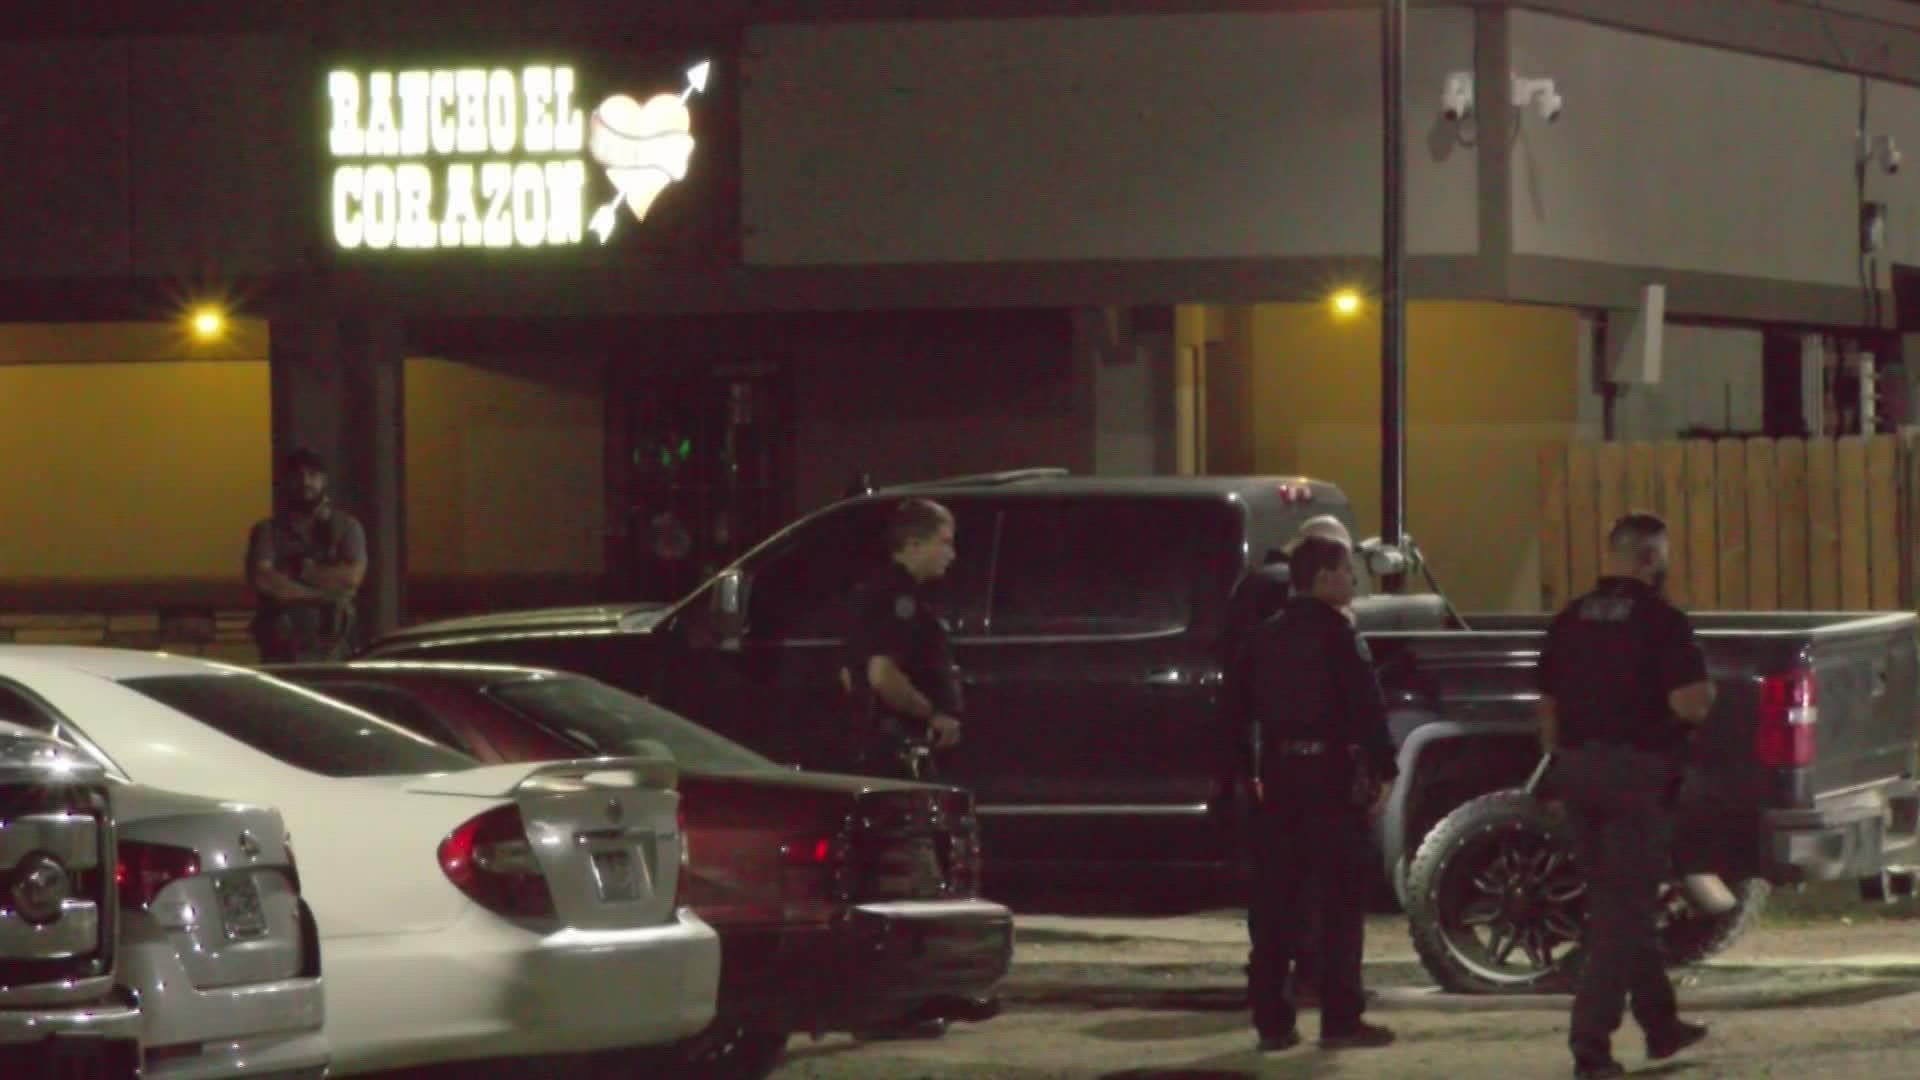 Police said two people were hurt in the Aug. 13 shooting outside the Rancho El Corazon bar.